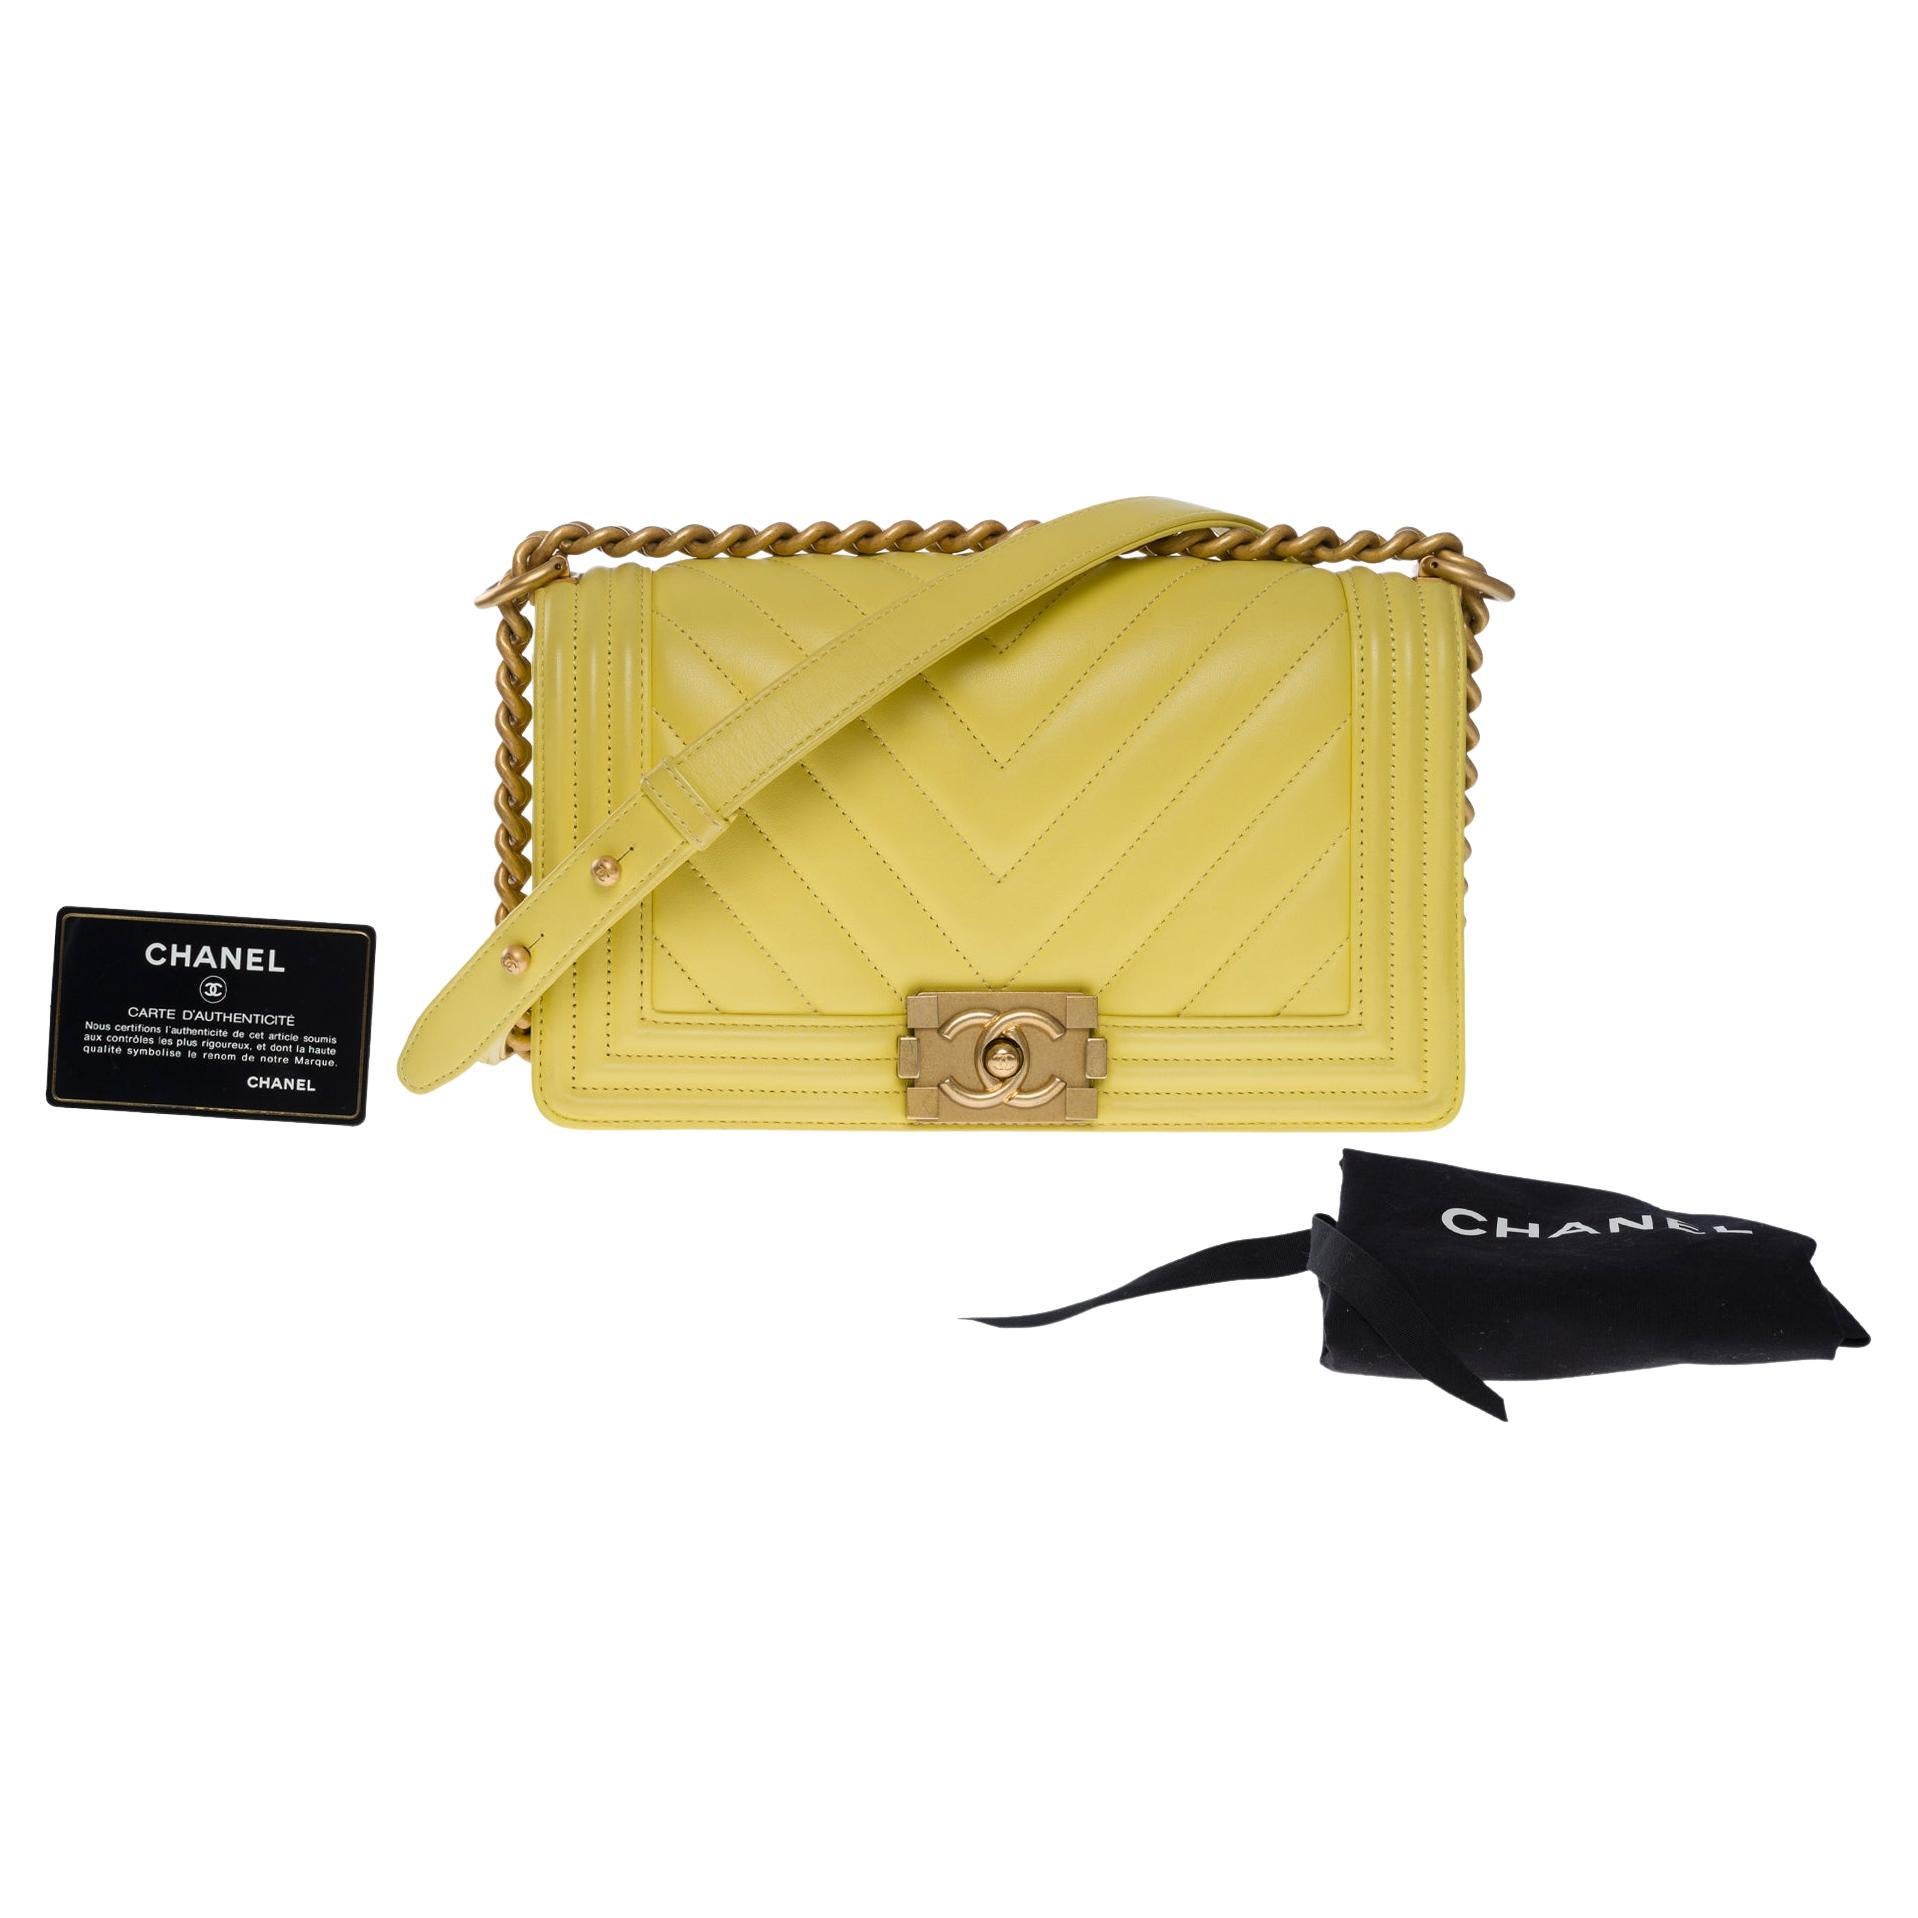 Chanel Boy Old Medium shoulder bag in Yellow quilted herringbone leather, MGHW For Sale